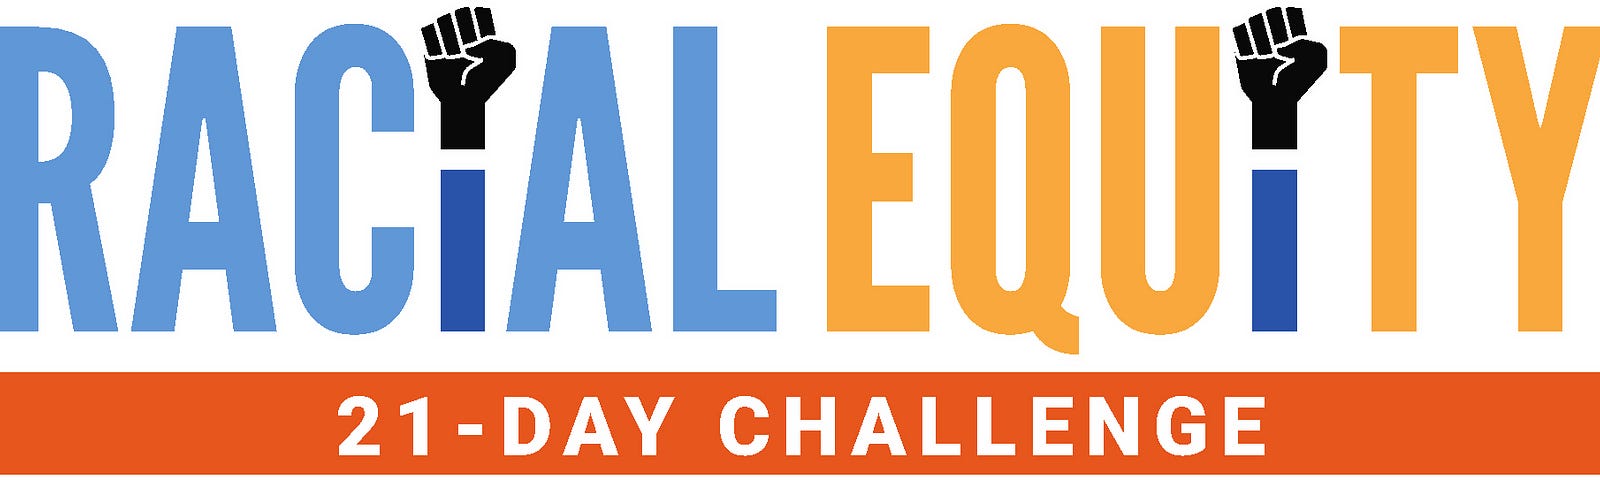 United Way graphic for 21-Day Racial Equity Challenge